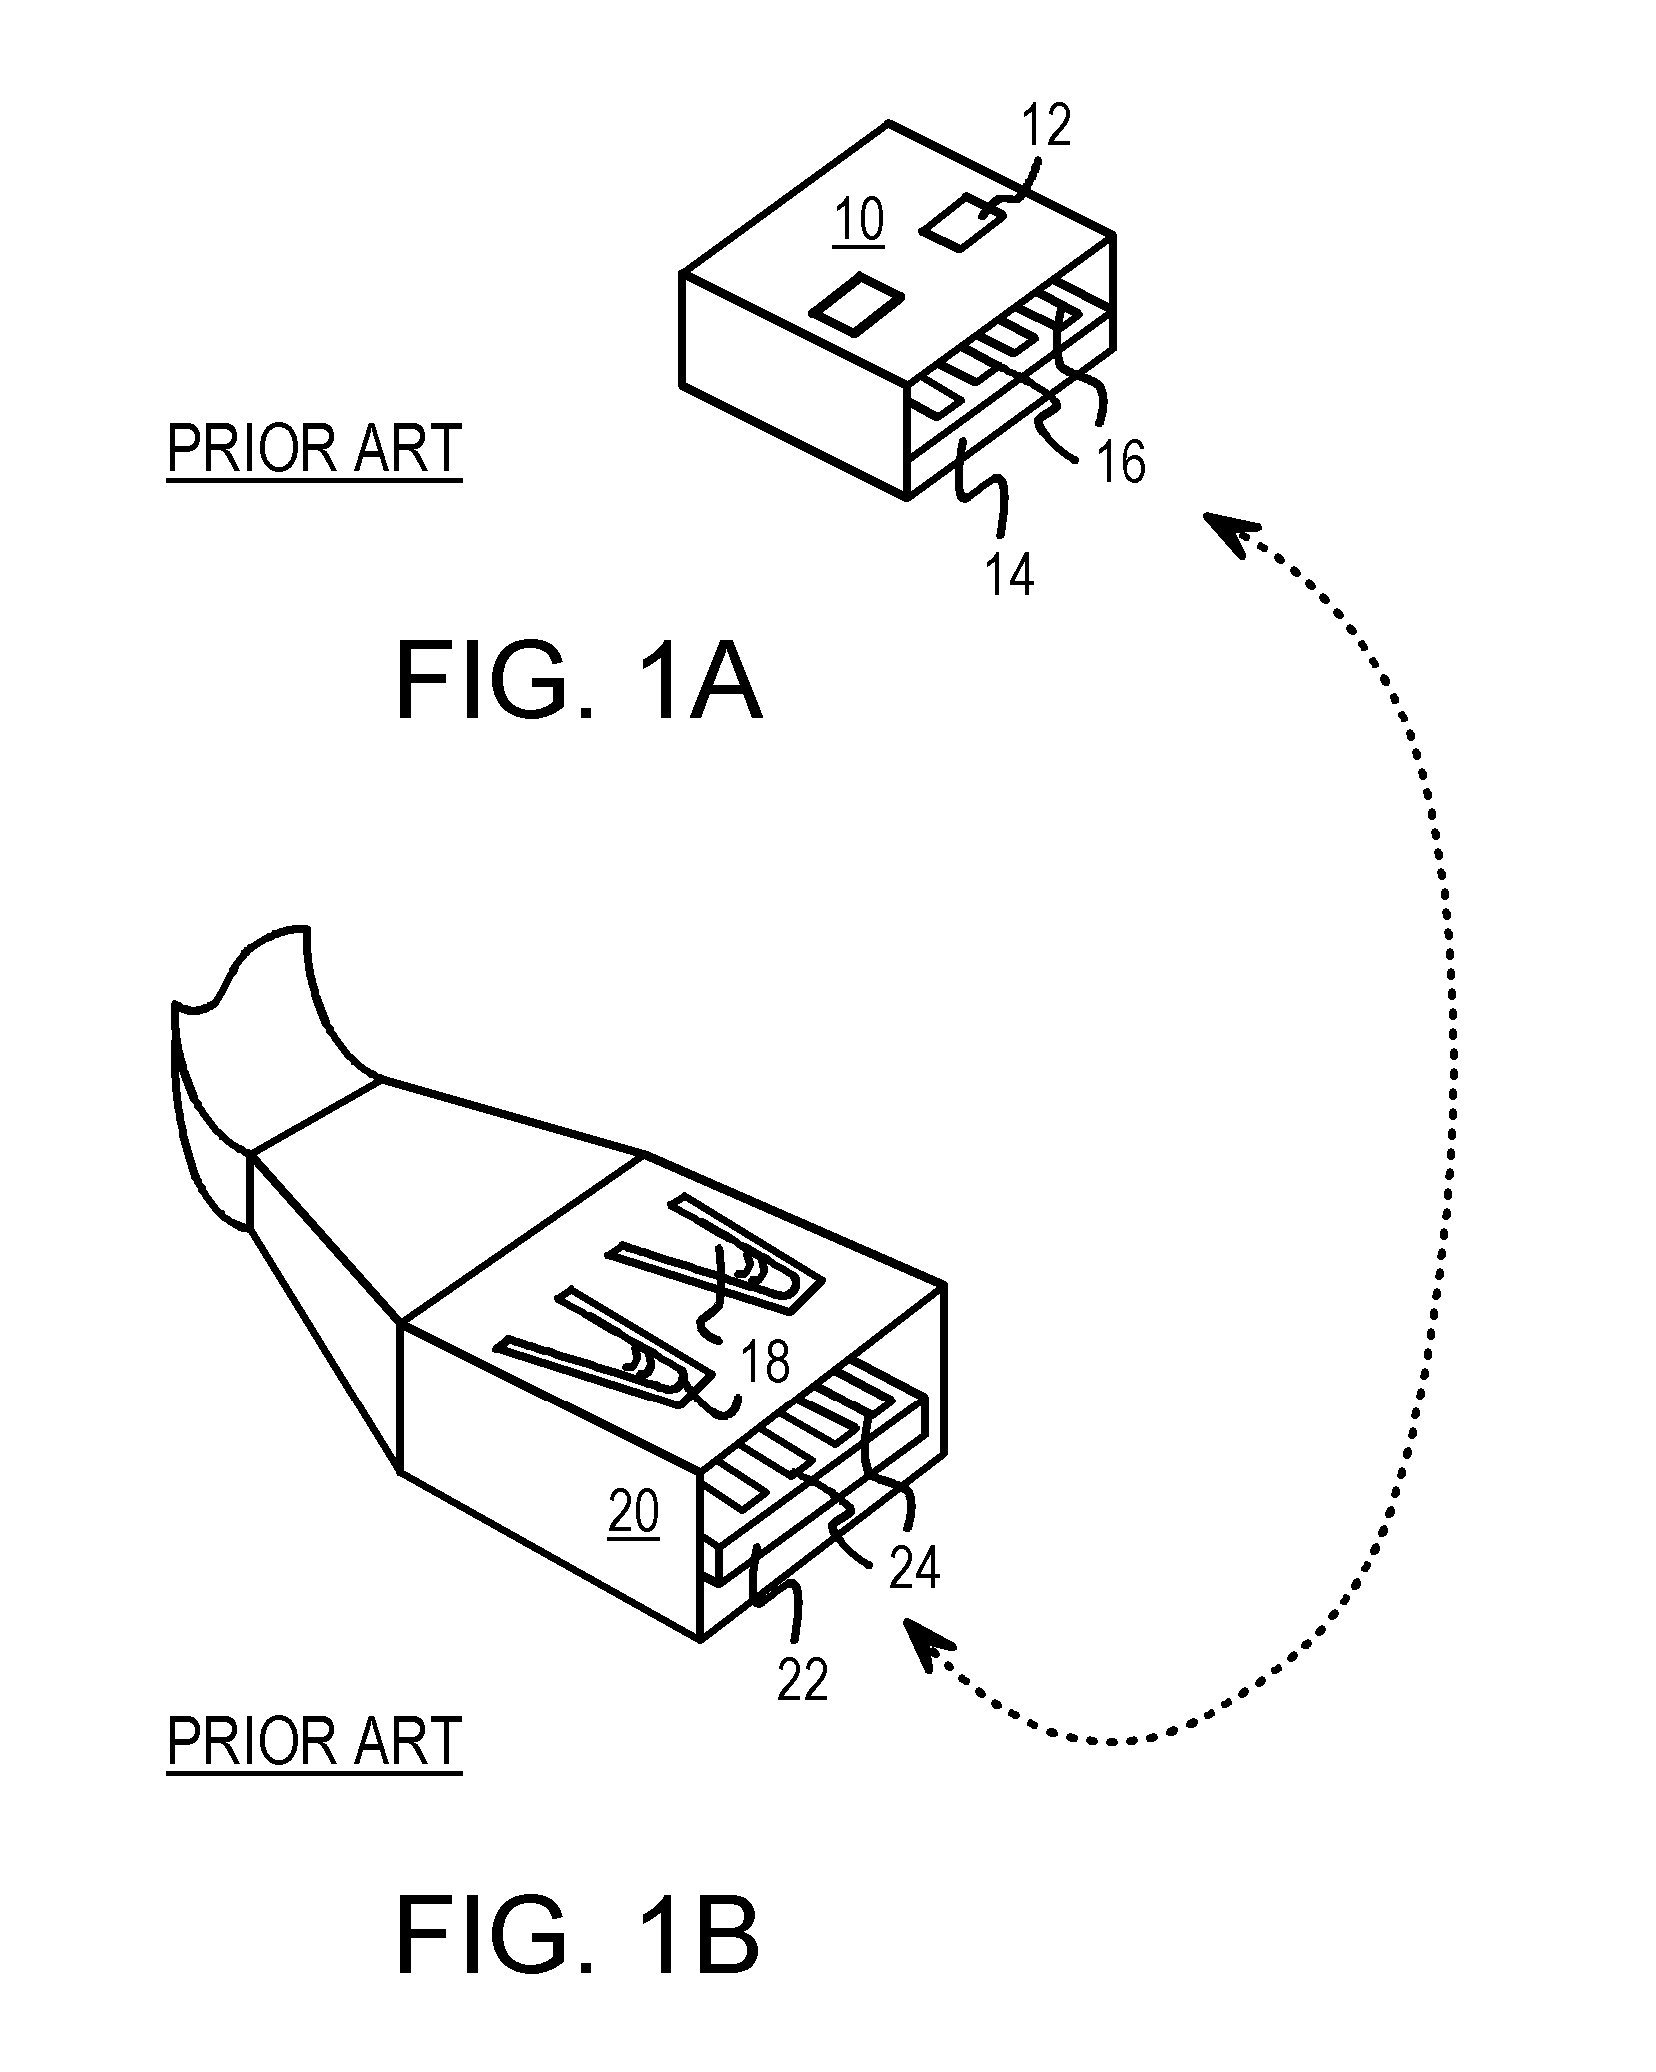 Dual-personality extended-USB plug and receptacle with PCI-Express or Serial-At-Attachment extensions